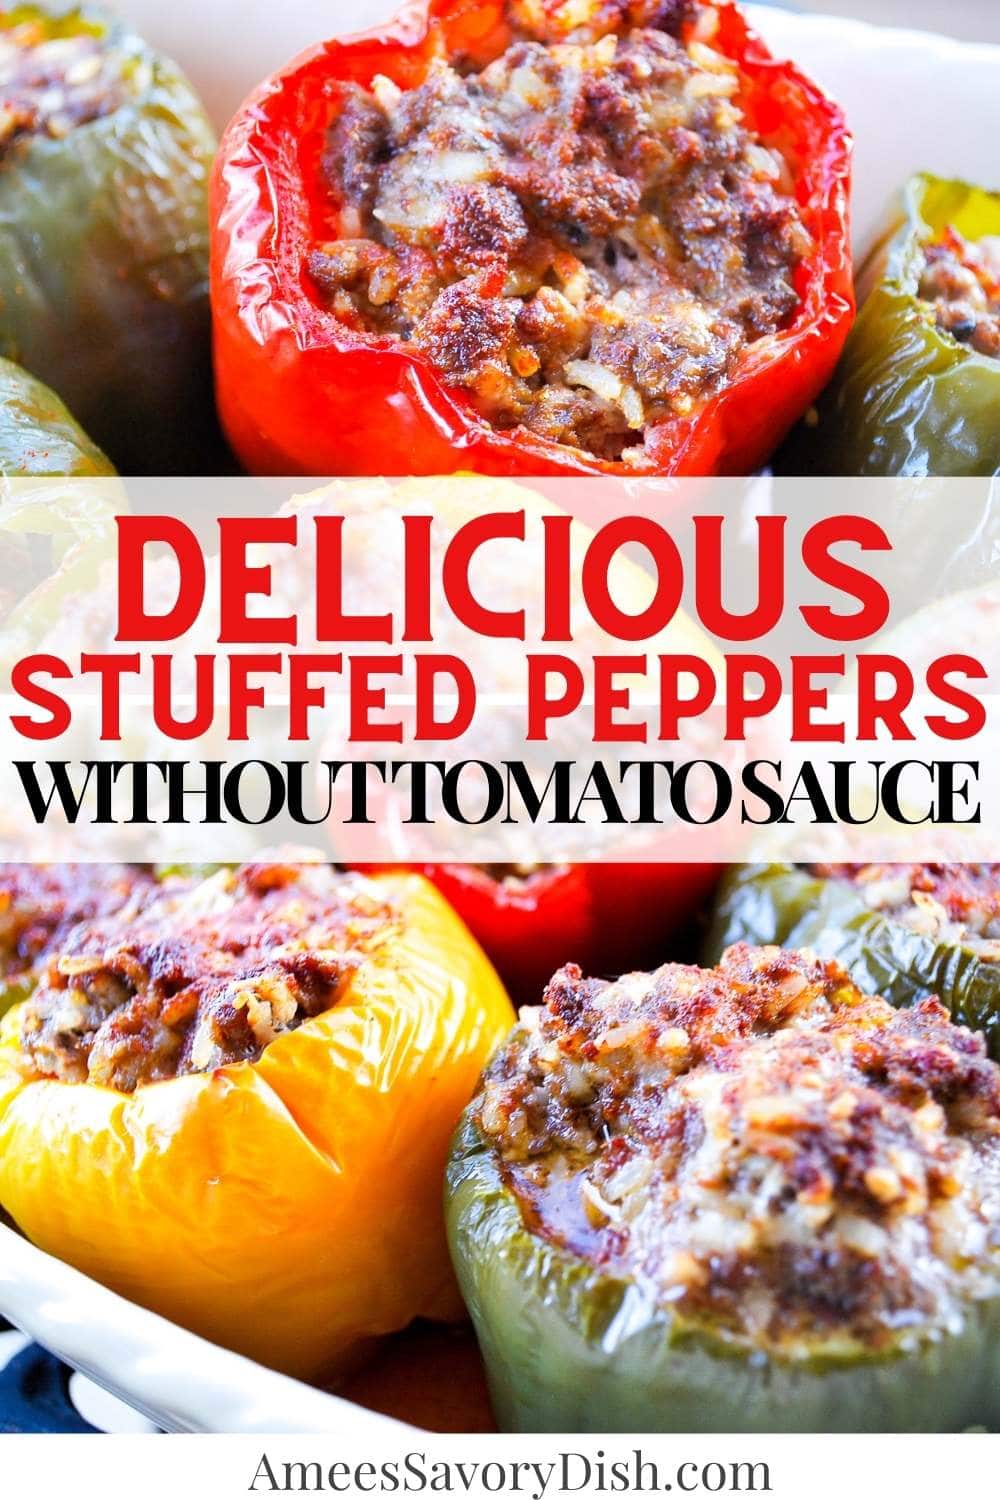 These gluten-free old-fashioned stuffed peppers are made with only a few simple ingredients. Steamed rice, lean ground beef, parmesan cheese, and spices are stuffed into colorful bell peppers, drizzled with olive oil, and baked to perfection. via @Ameessavorydish